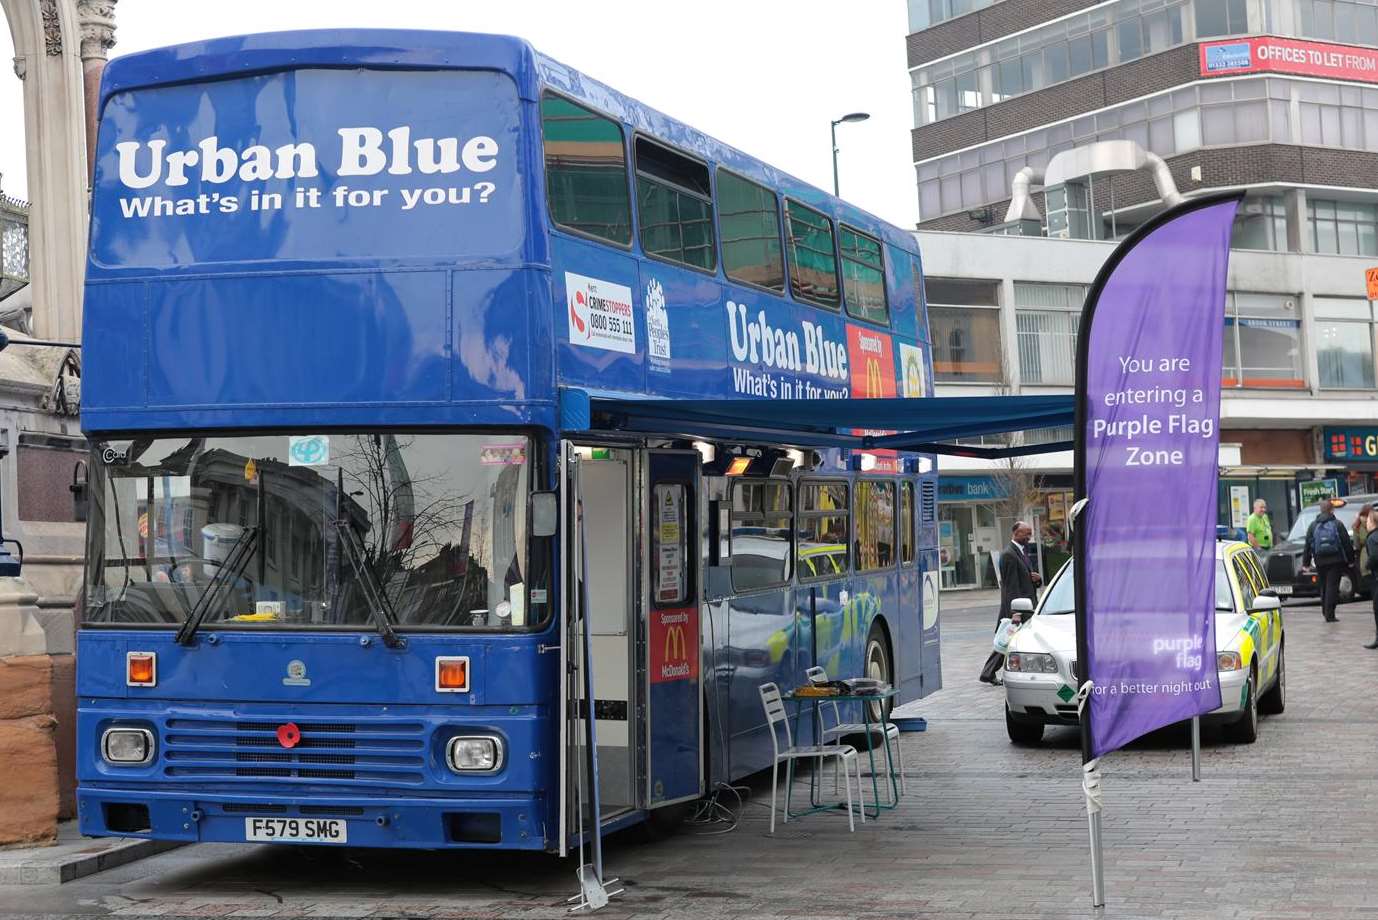 The Urban Blue Bus in Maidstone's Jubilee Square